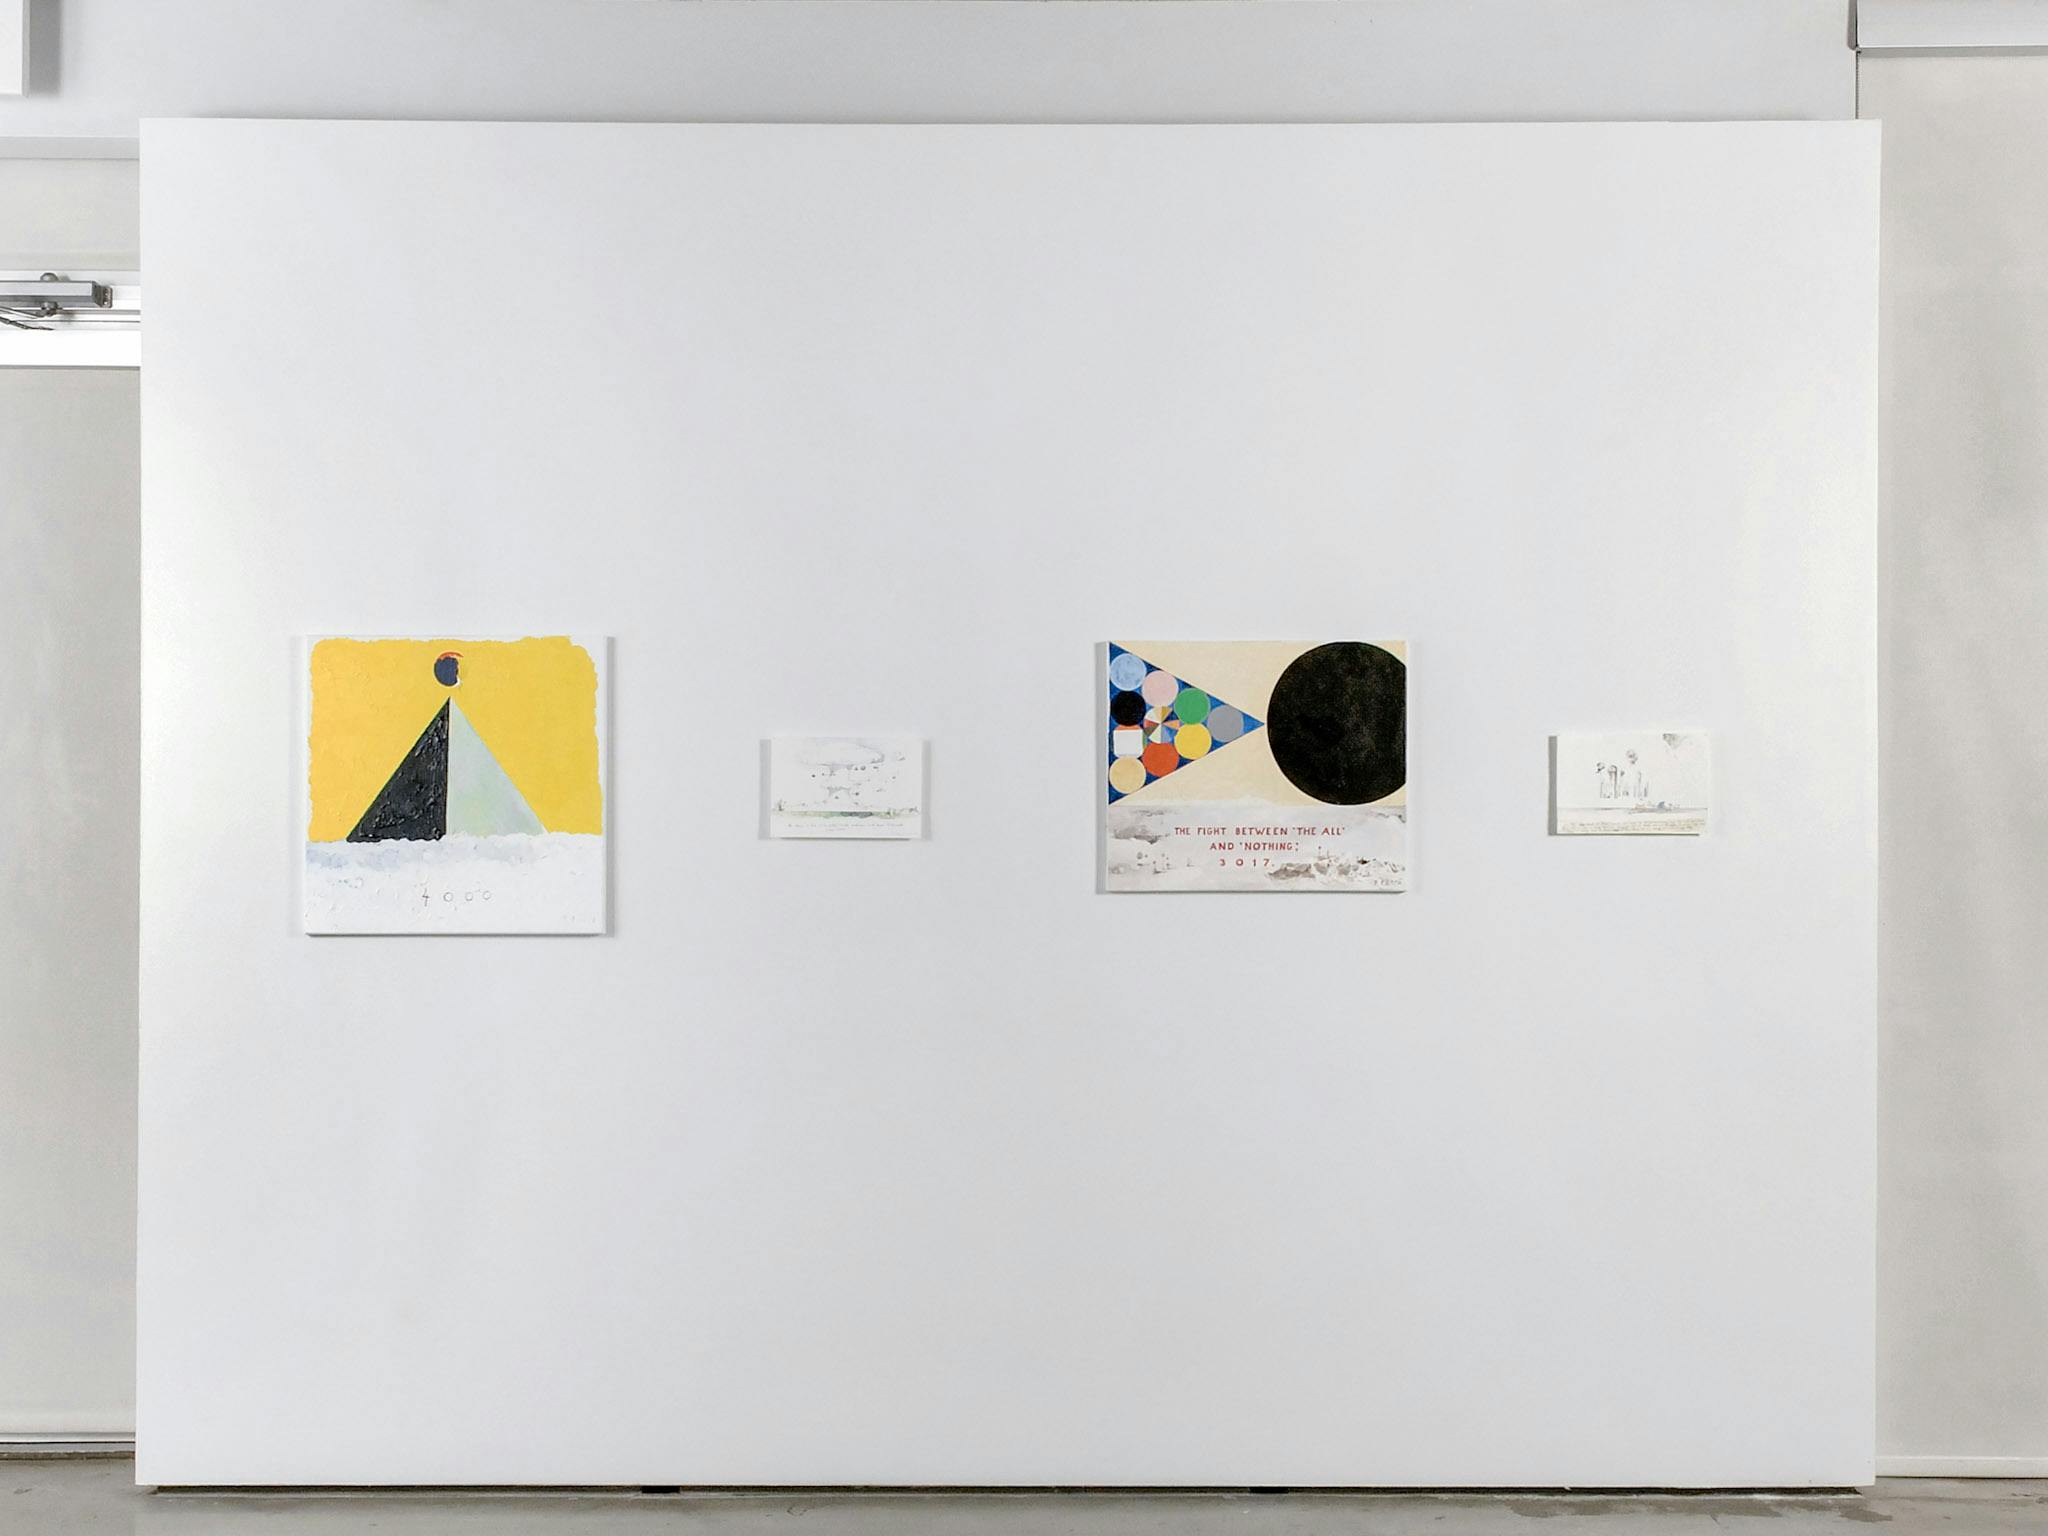 Four coloured drawings are mounted on the gallery wall. Two of them are larger than the rest. These large drawings depict geometric shapes including triangles and circles. 